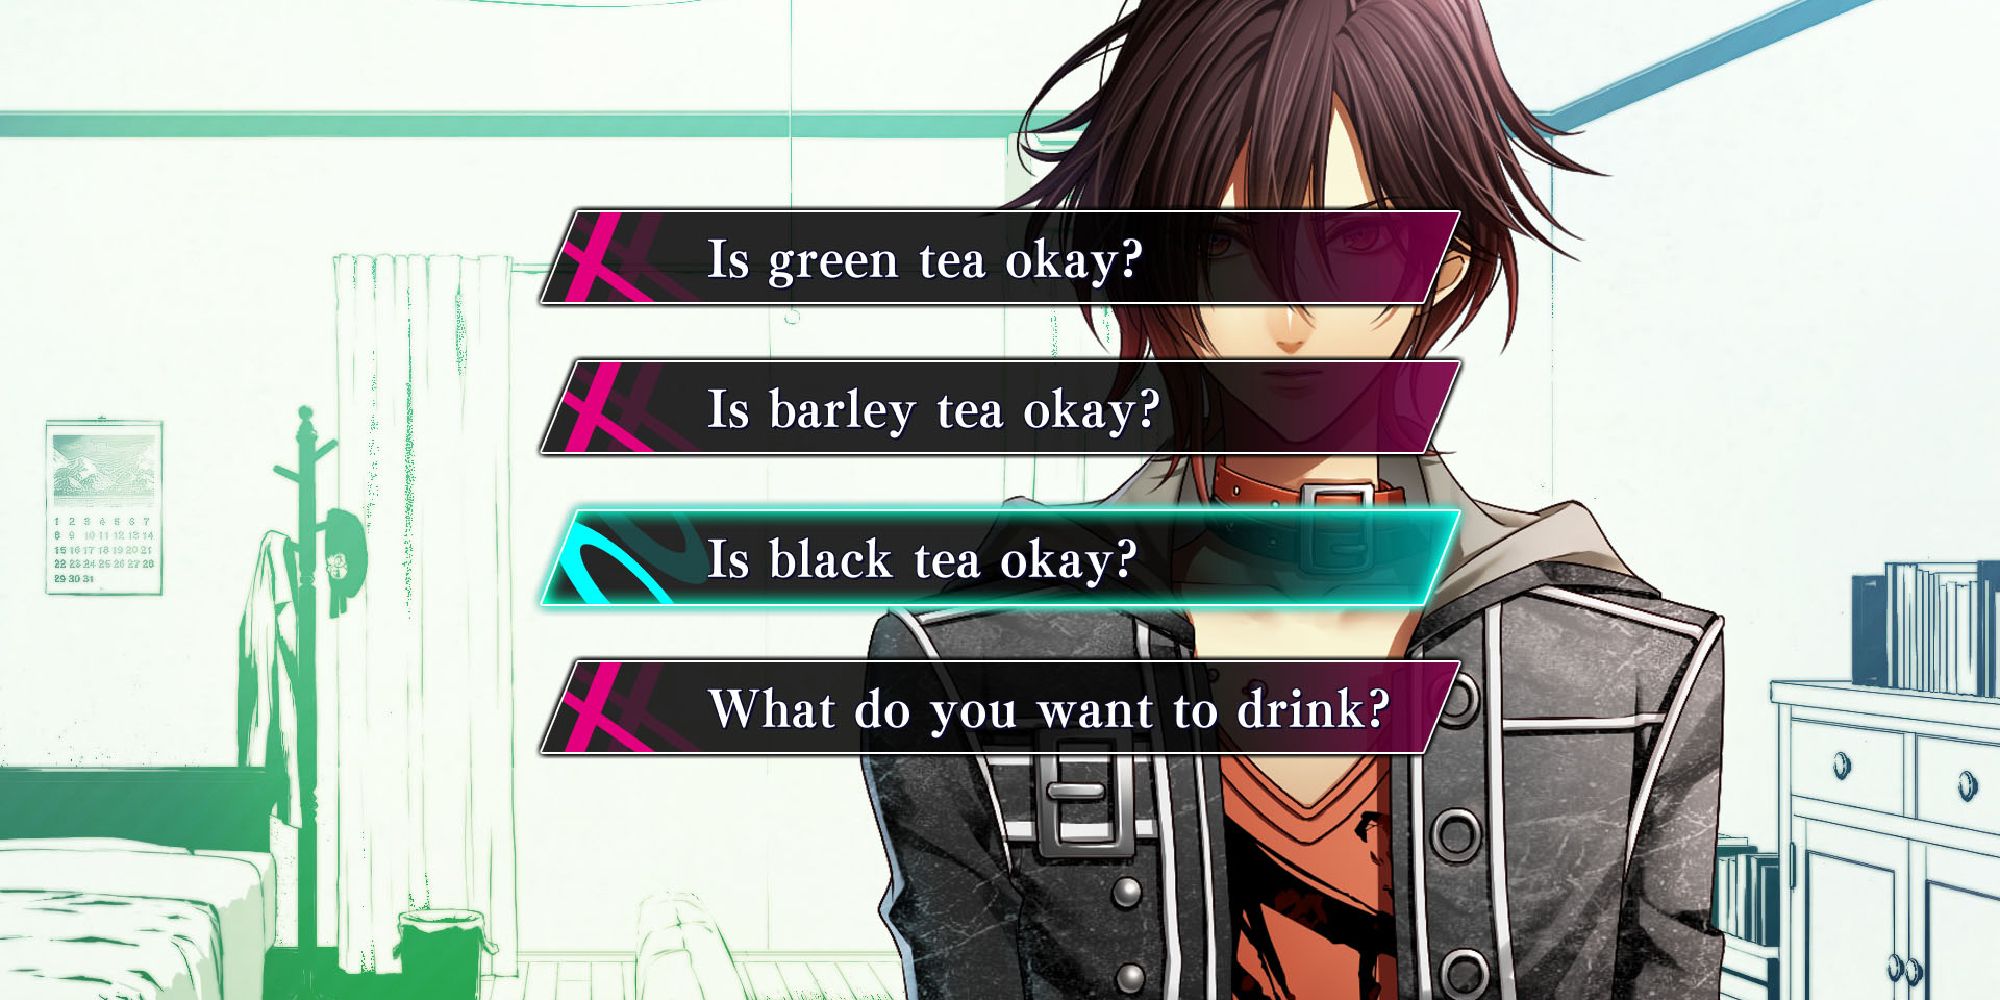 choosing which tea option you want